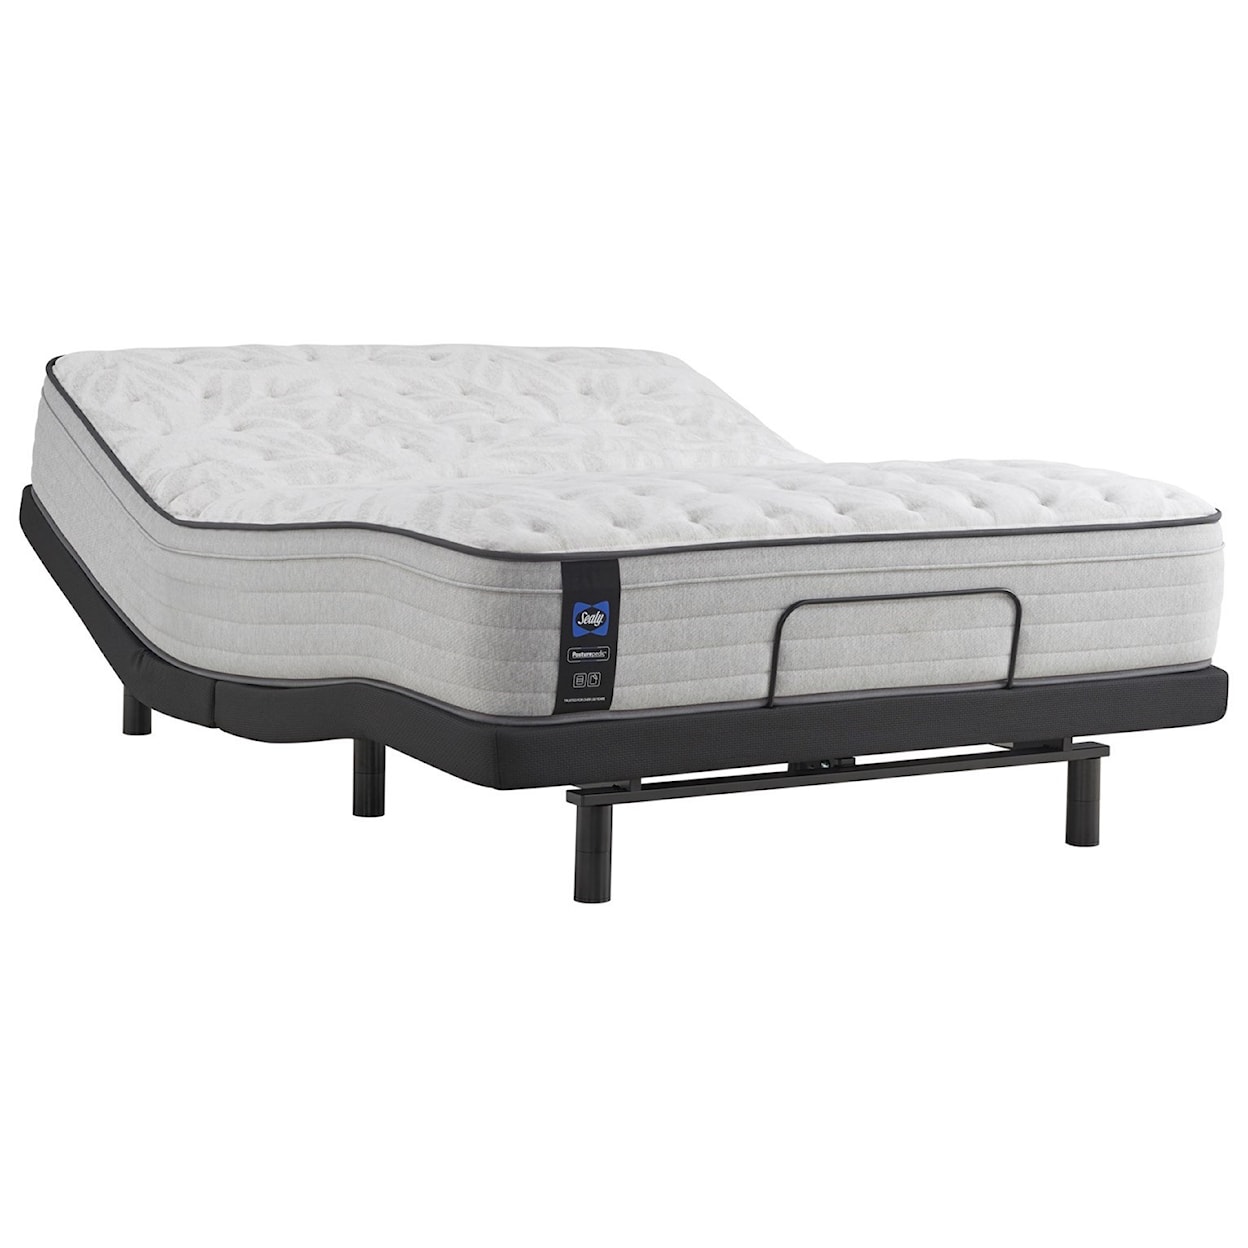 Sealy PPS3 Posturpedic Innerspring Firm FXET Cal King 13" Firm FXET Adjustable Set